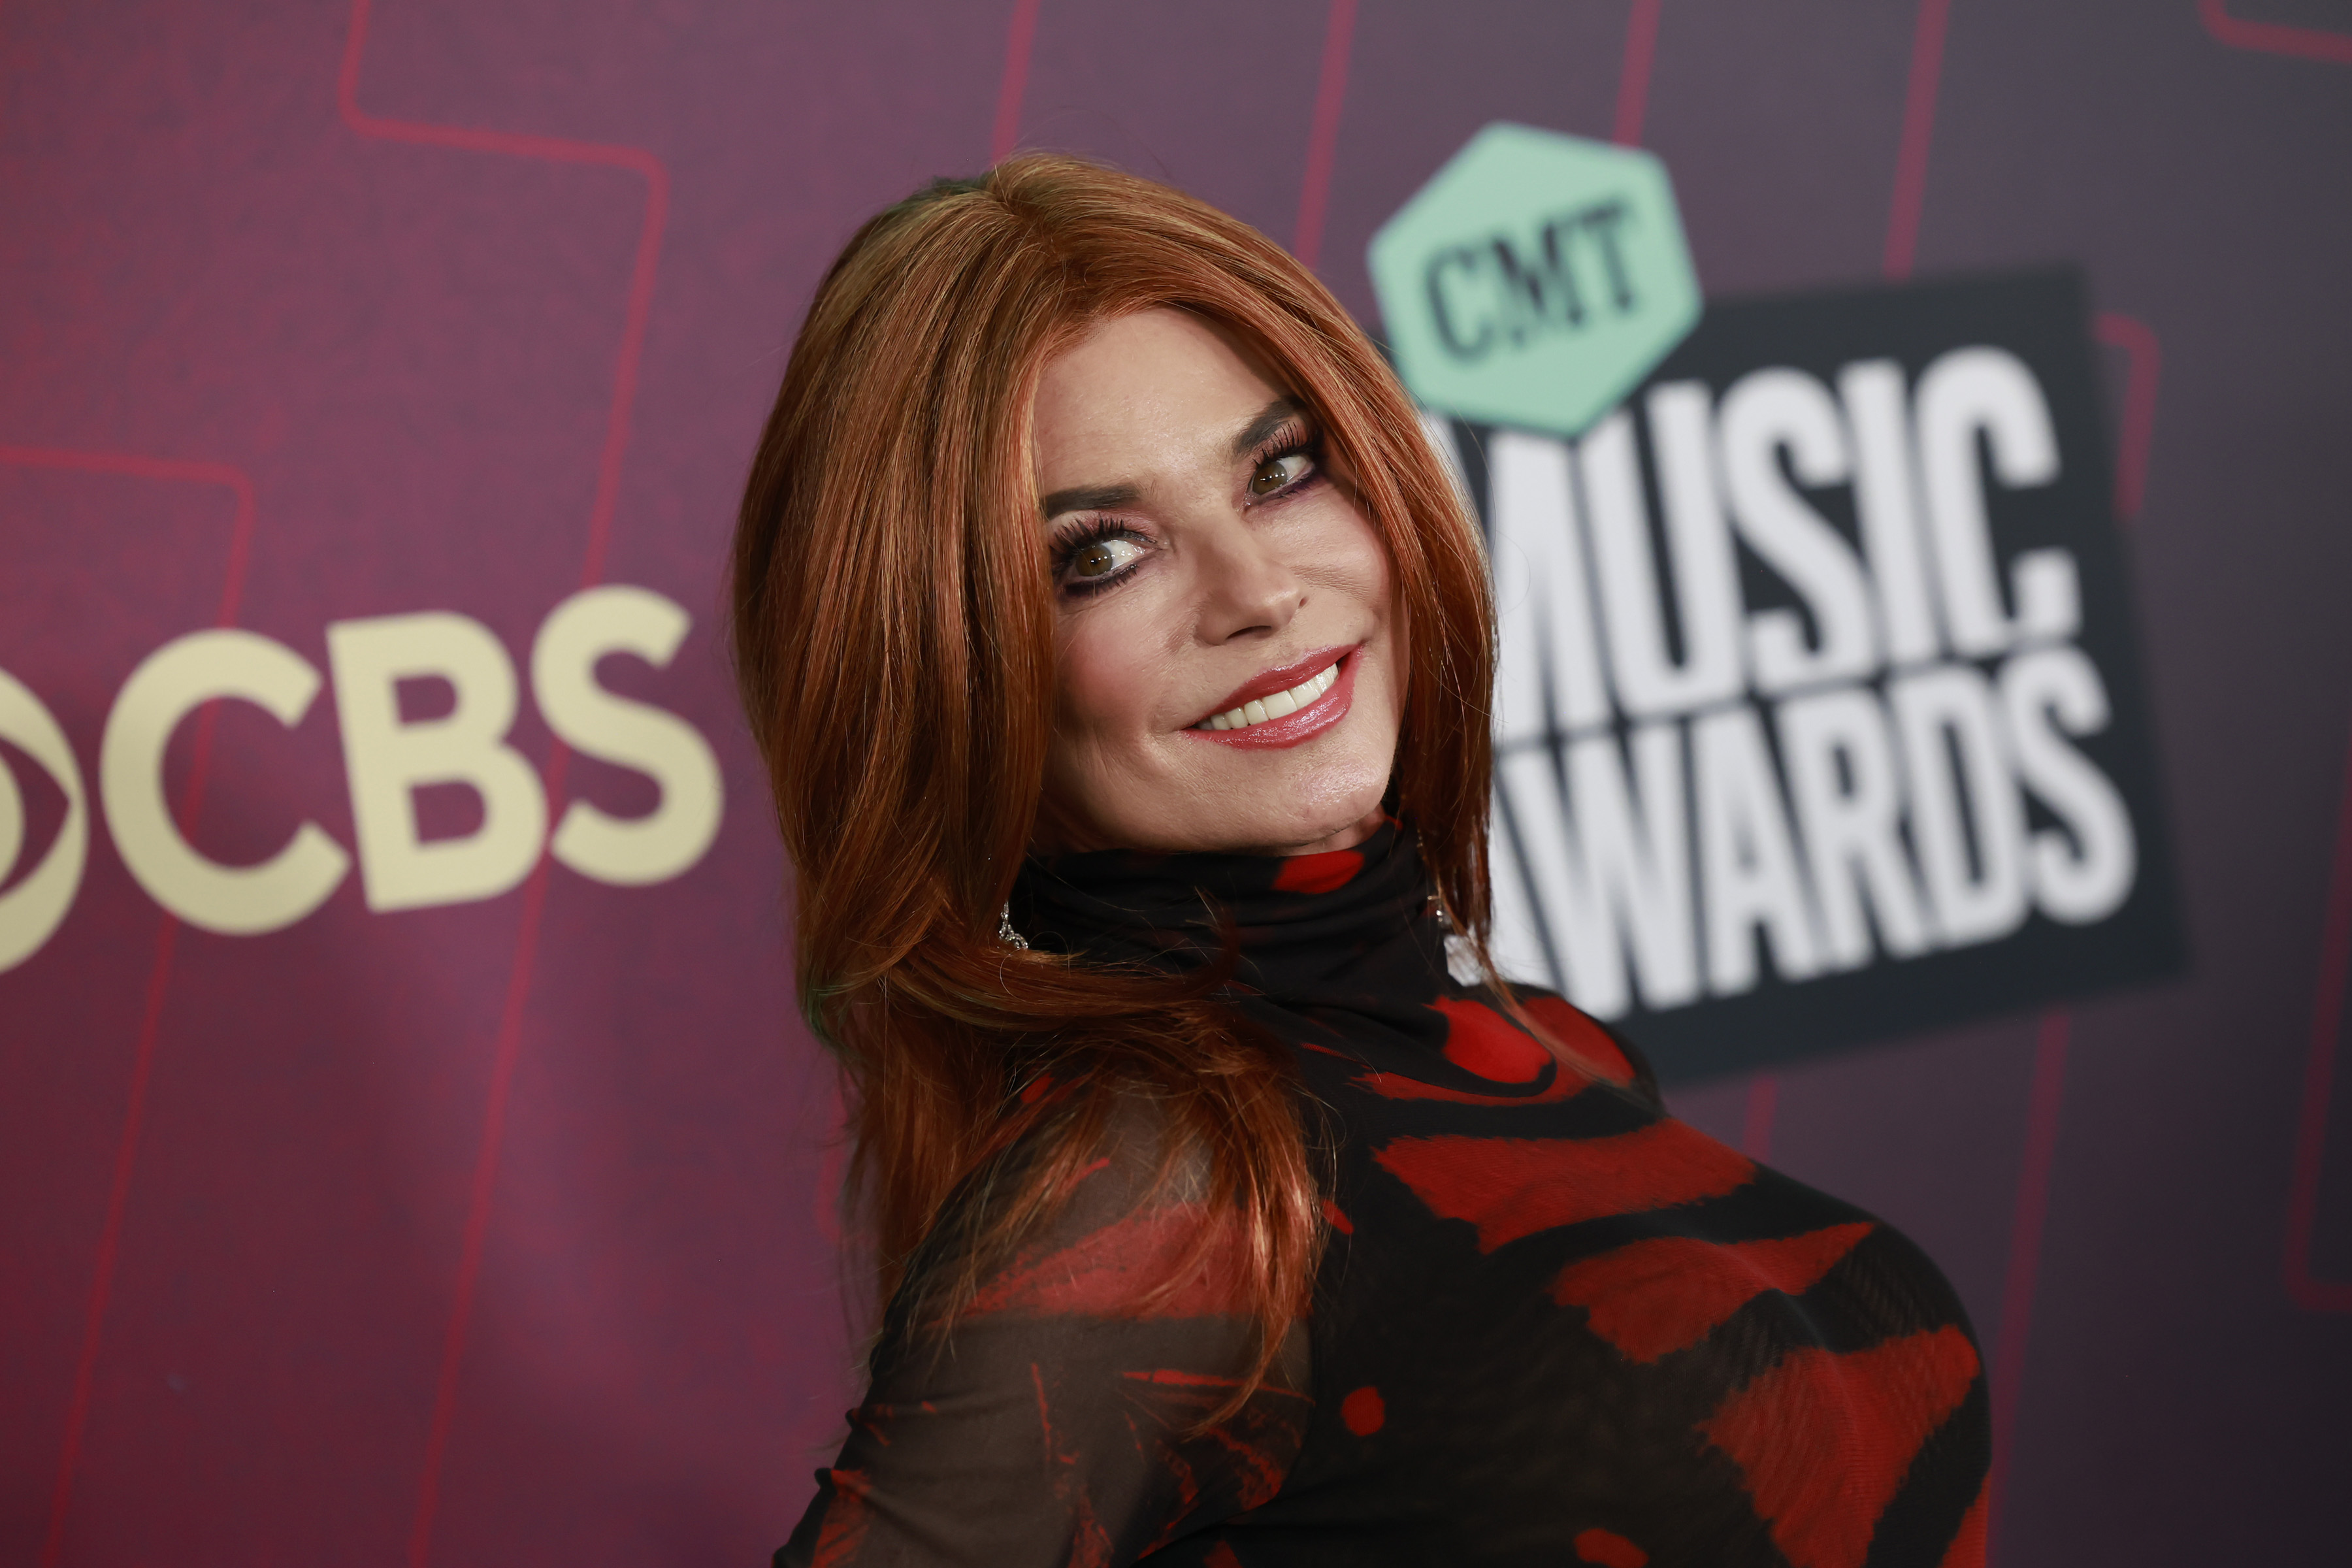 Shania Twain attends the 2023 CMT Music Awards at Moody Center on April 2, 2023, in Austin, Texas. | Source: Getty Images